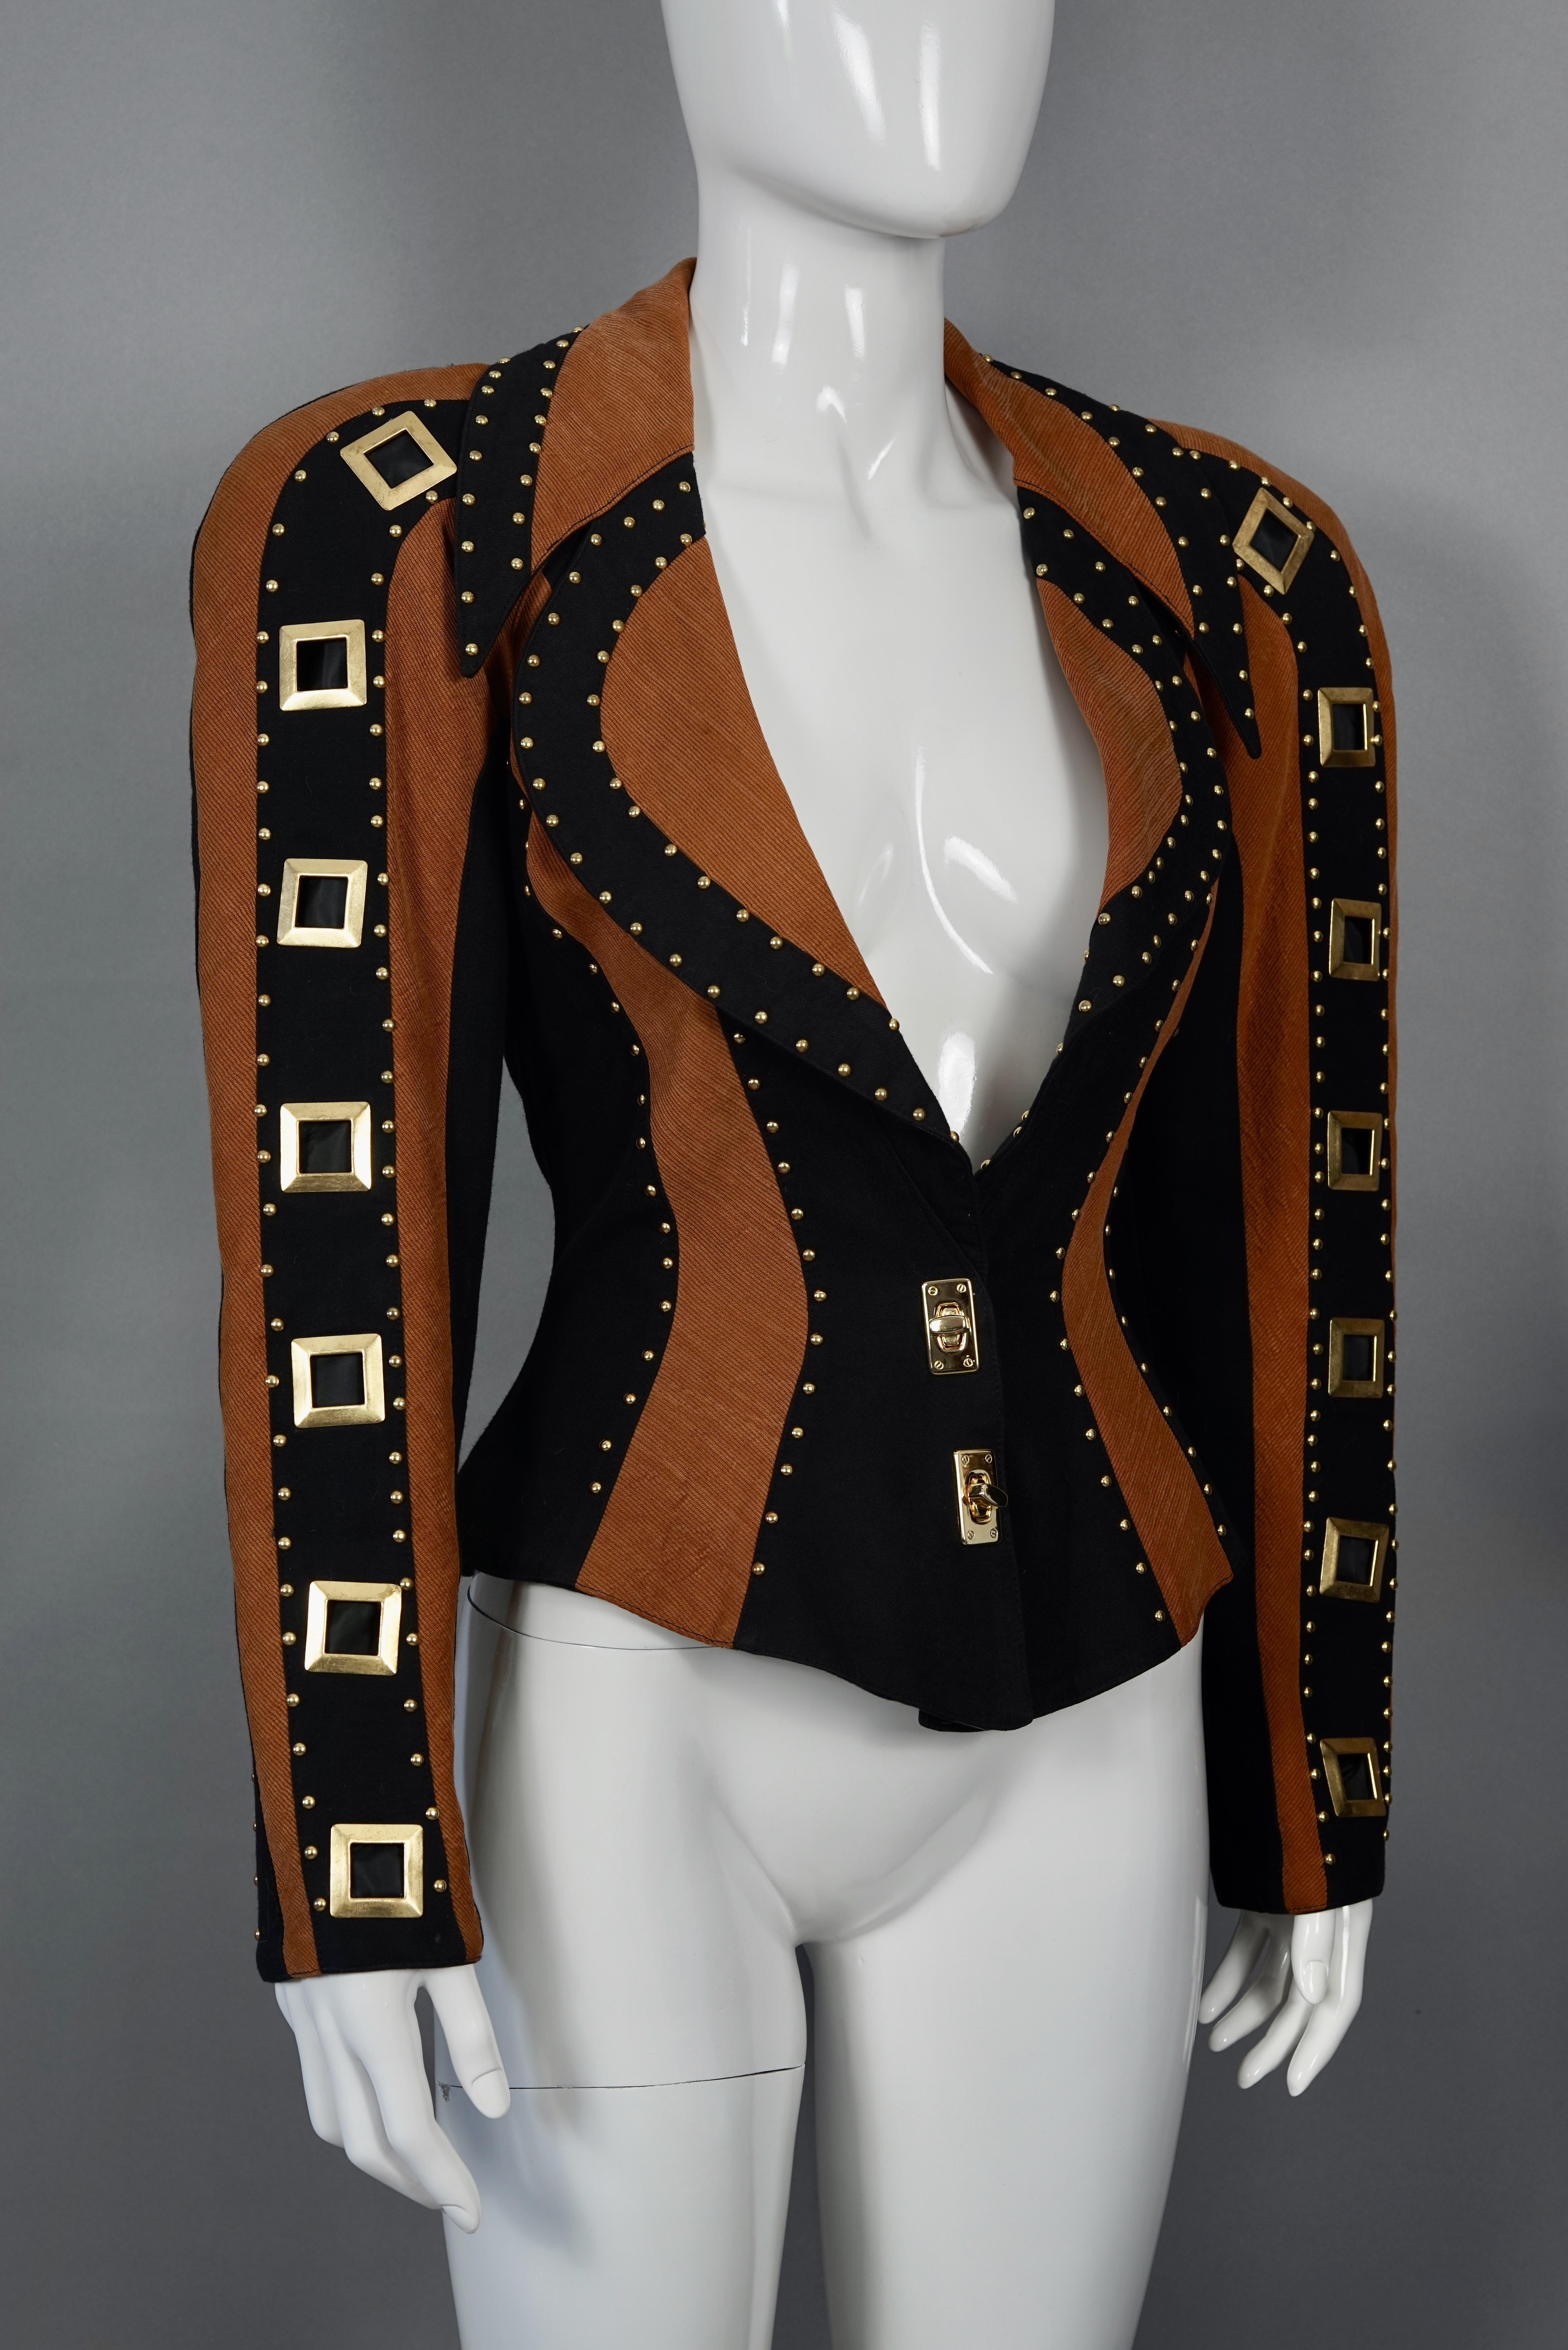 Vintage CHRISTIAN LACROIX Studs and Jeweled Buttons Contrast Jacket

Measurements taken laid flat, please double bust and waist:
Shoulder: 22.04 inches (56 cm)
Sleeves: 23.22 inches (59 cm)
Bust: 18.89 inches (48 cm)
Waist: 15.35 inches (39